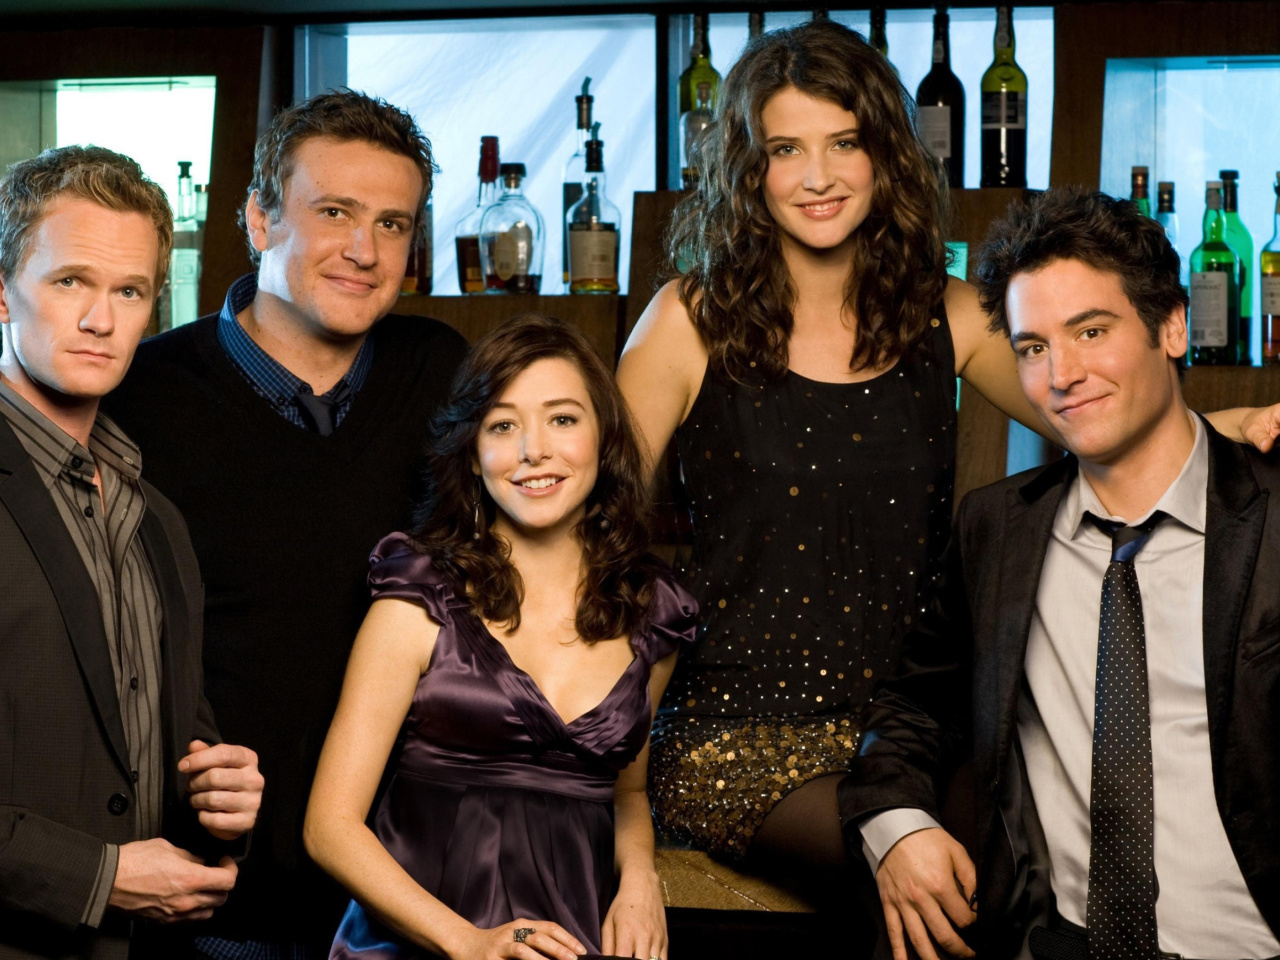 Sfondi How I Met Your Mother in Bar 1280x960